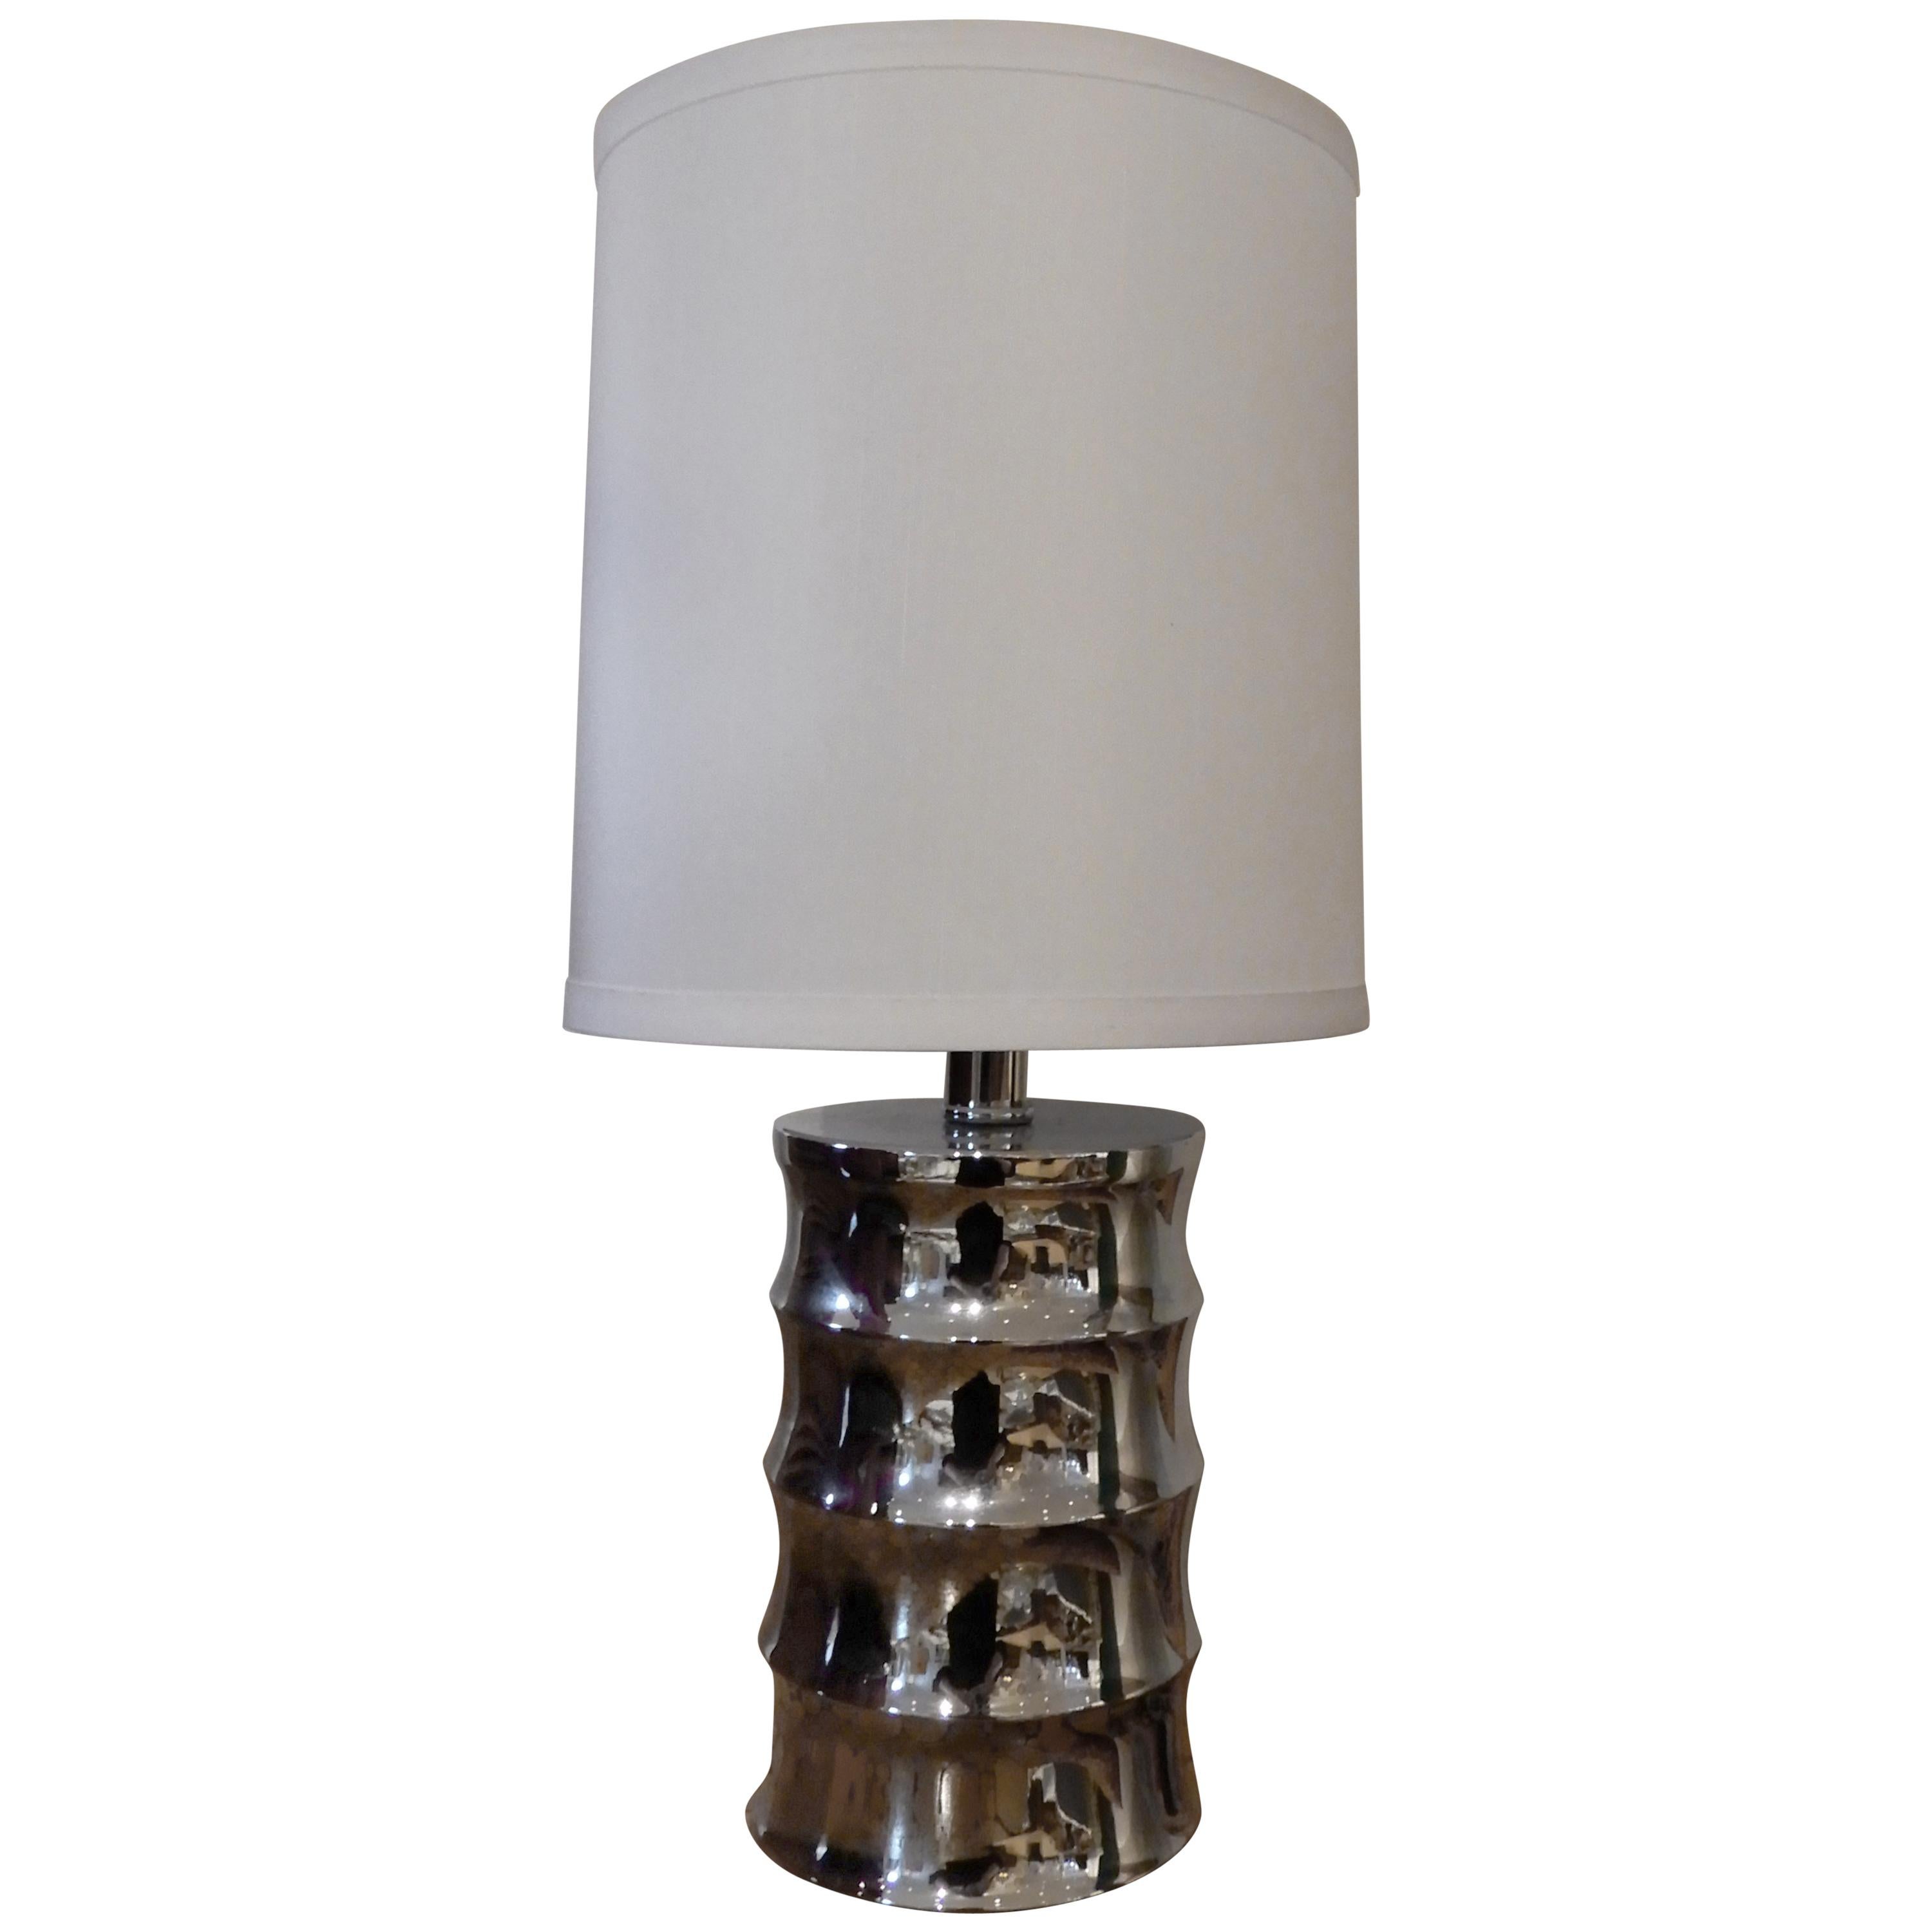 Pair of Retro Polished Chrome Table Lamps